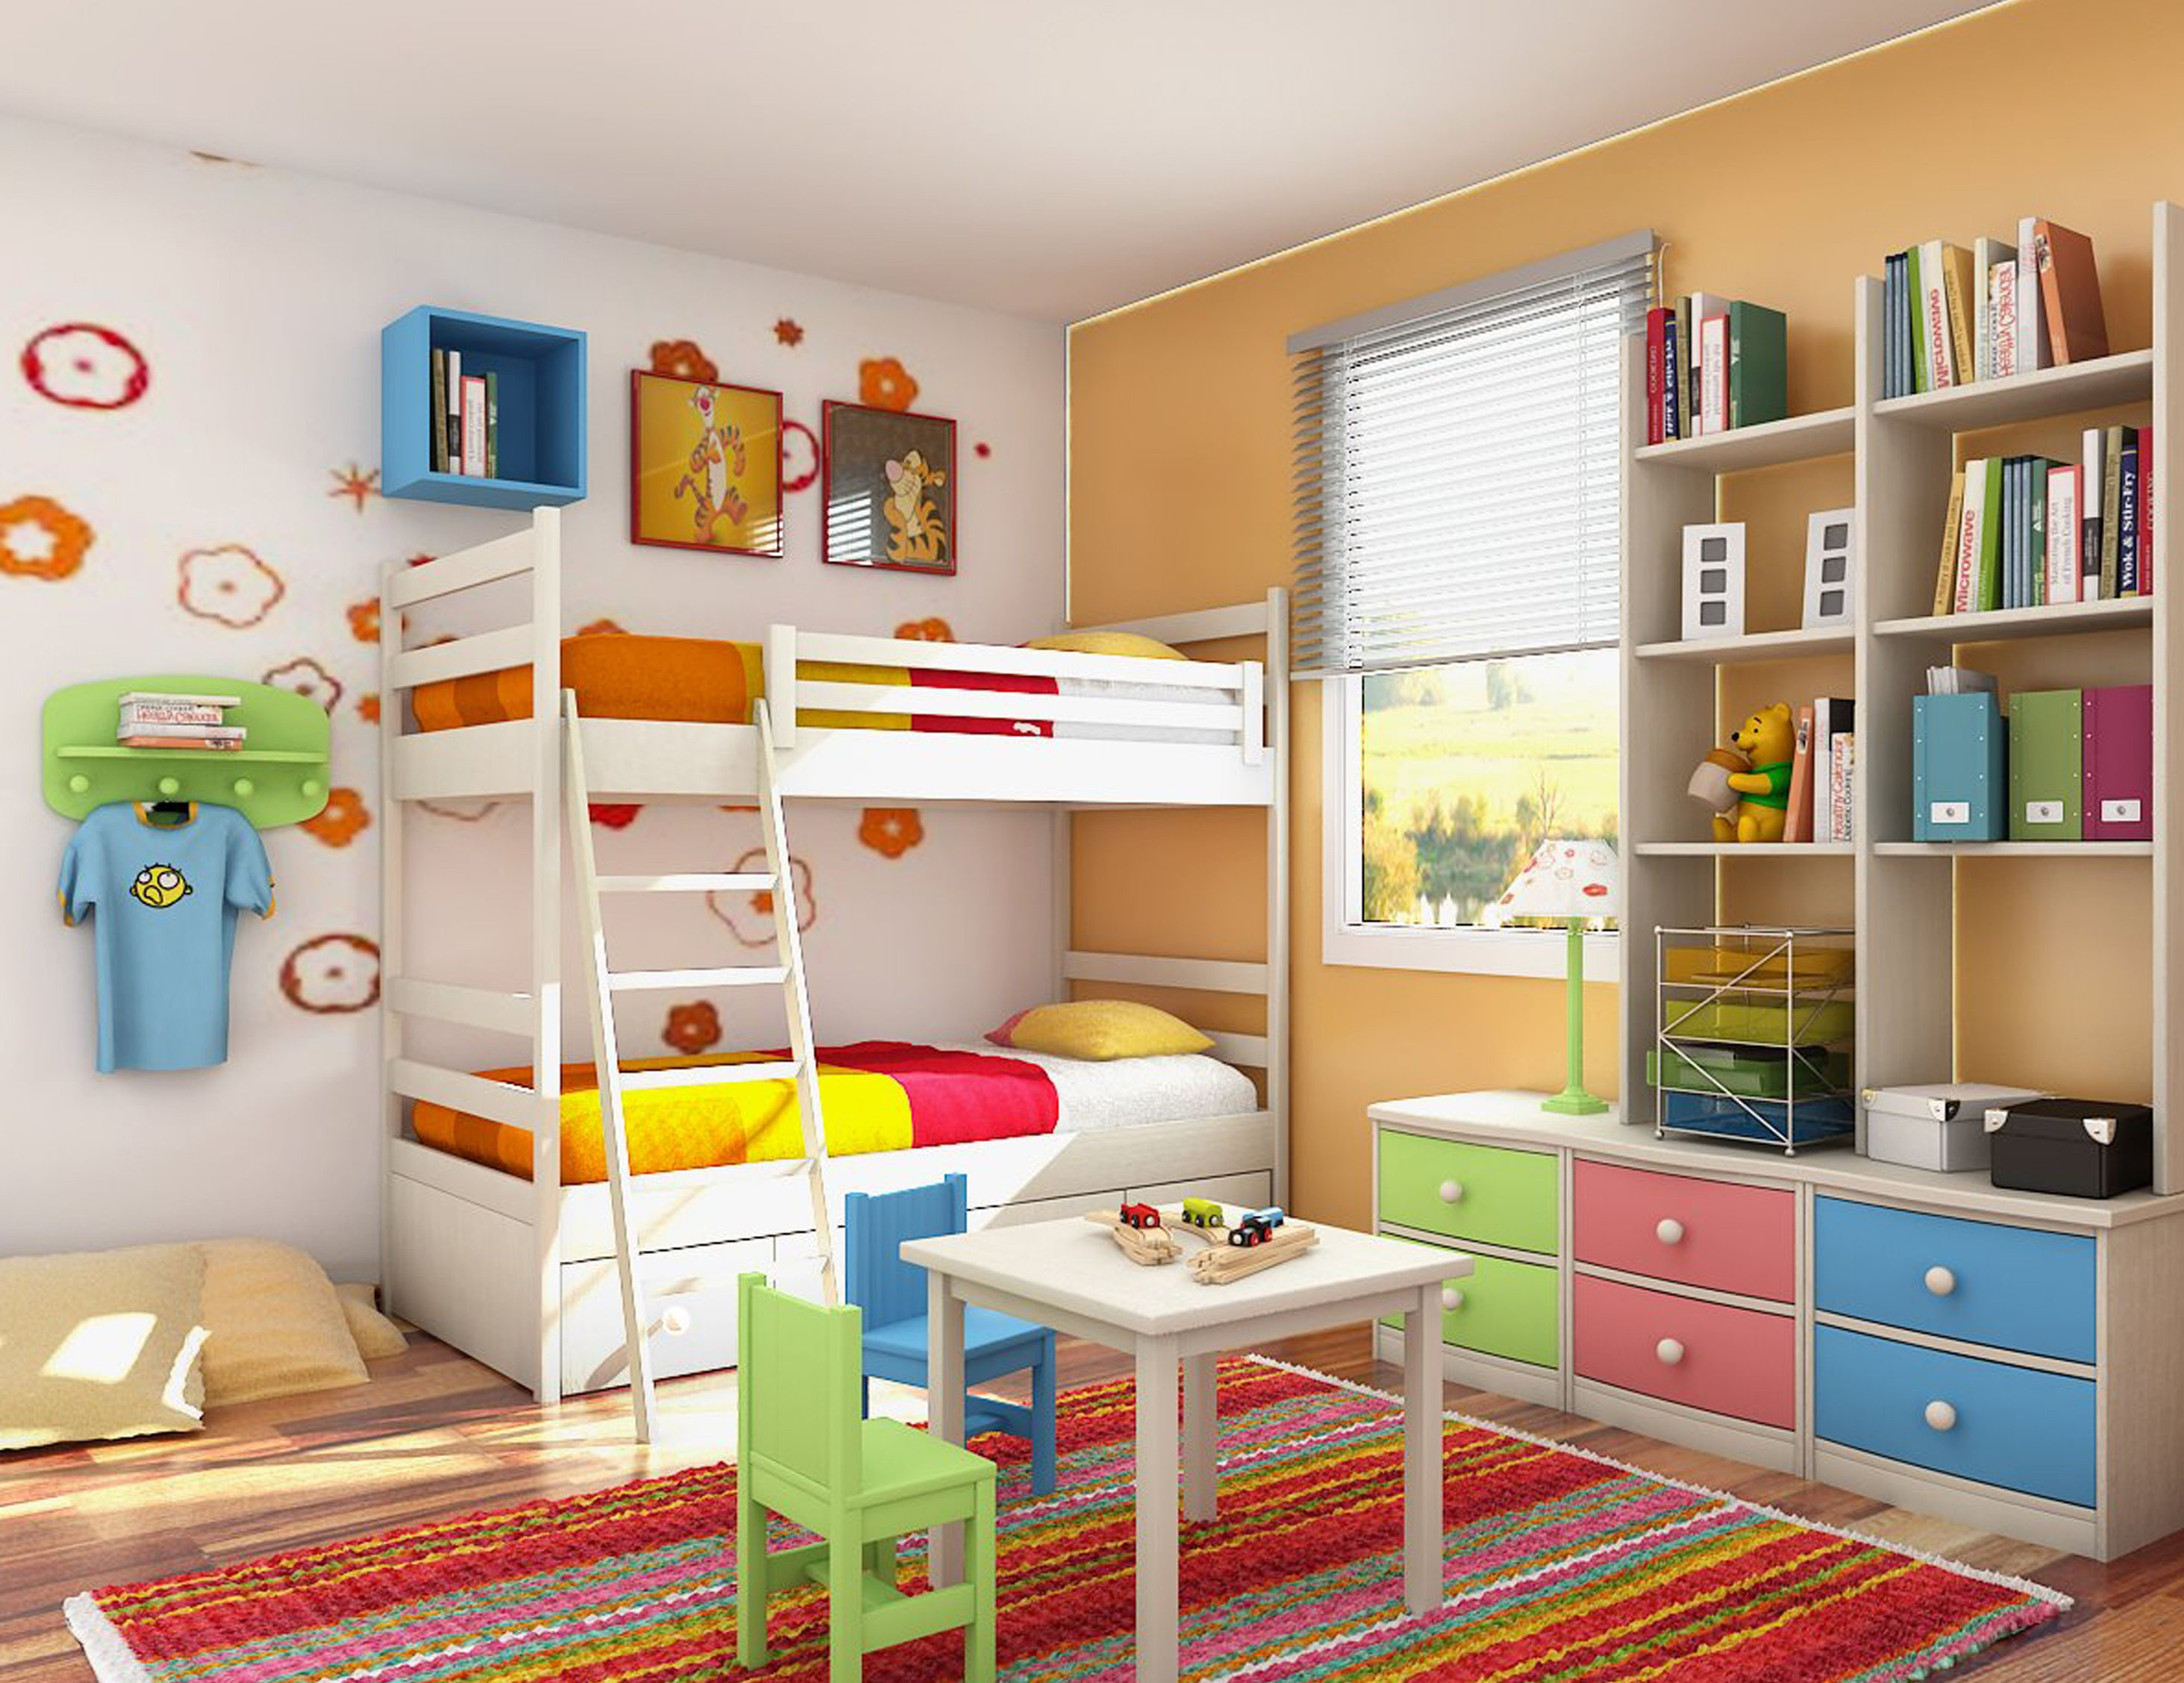 5 Simple and Easy Kids Bedroom Decorating Tips | My Decorative